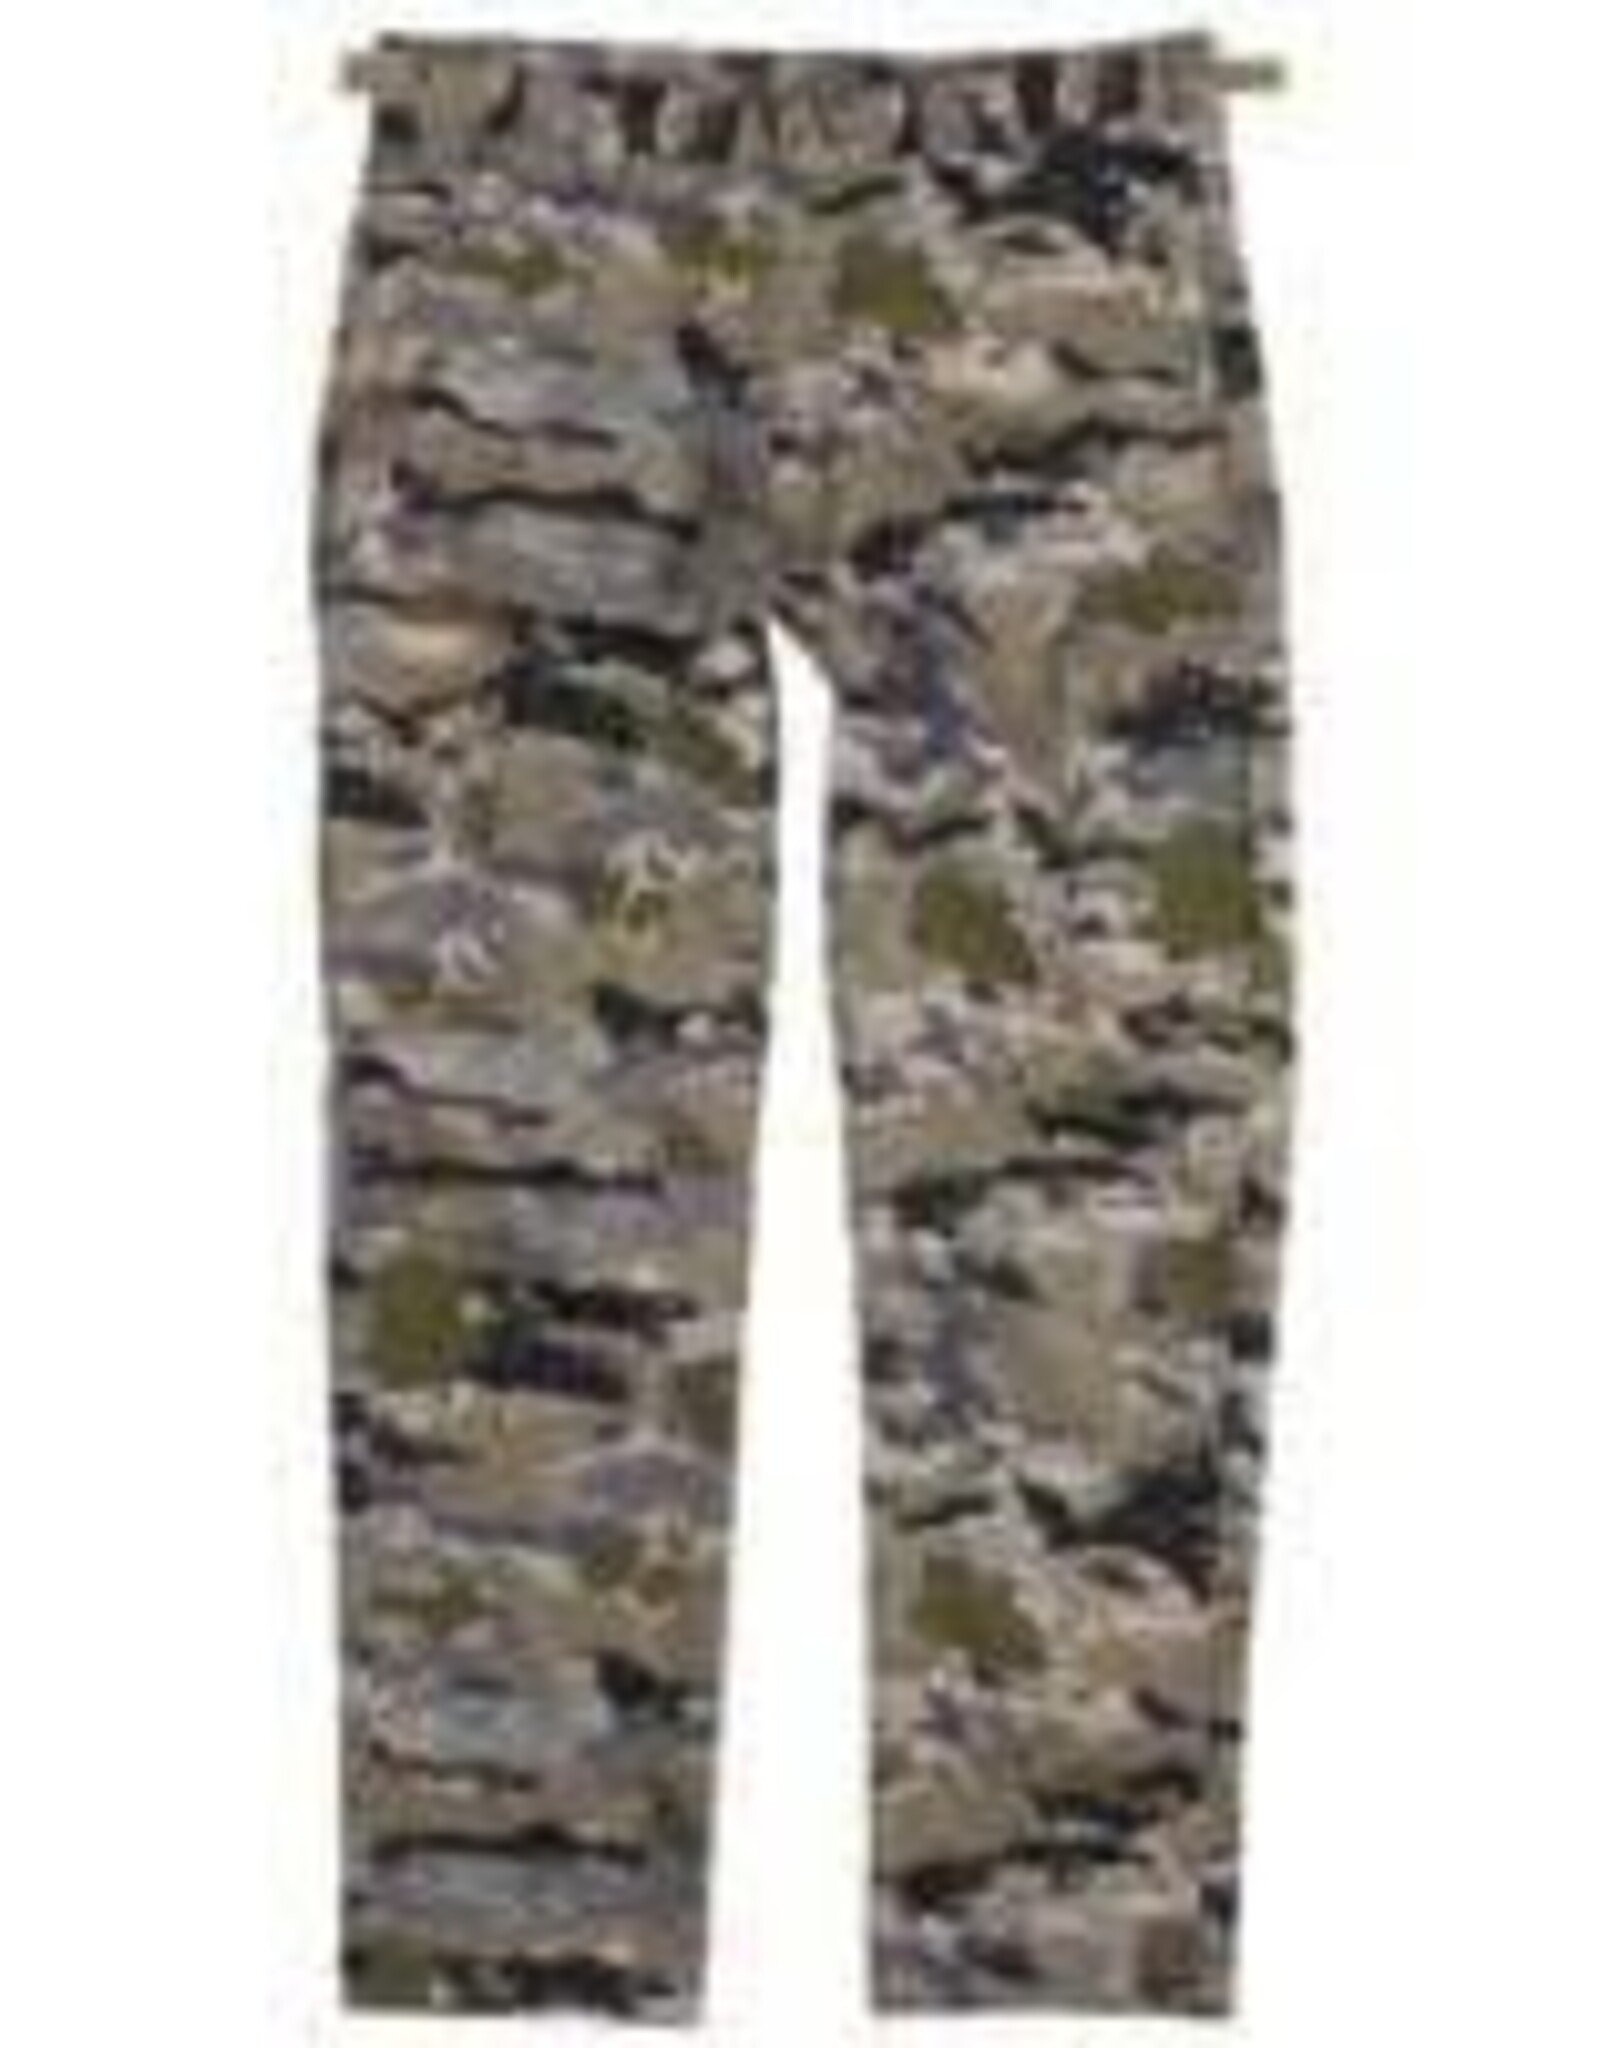 Browning Wasatch Pants